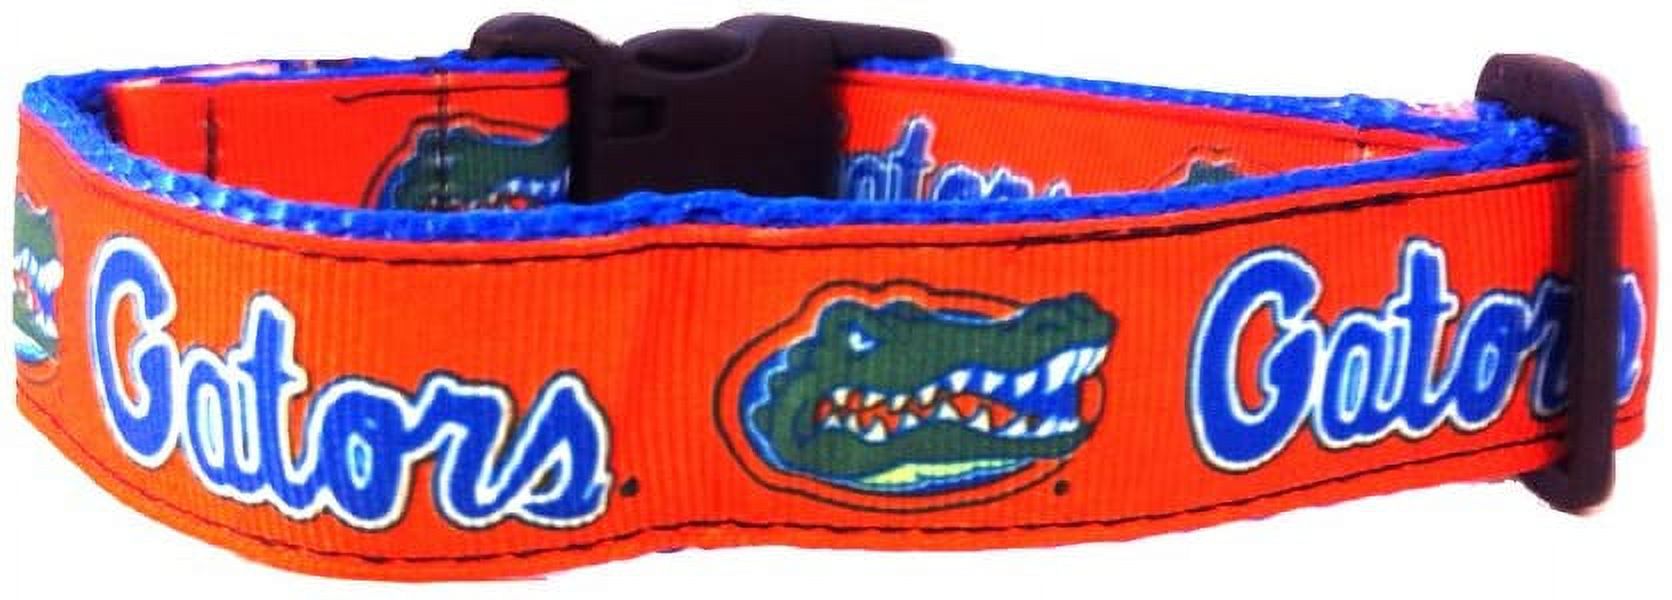 Brand New Florida X-Small Pet Dog Collar(3/4 Inch Wide, 6-12 Inch Long), and Small Leash(5/8 Inch Wide, 6 Feet Long) Bundle, Official Gators Logo/Colors - image 3 of 3